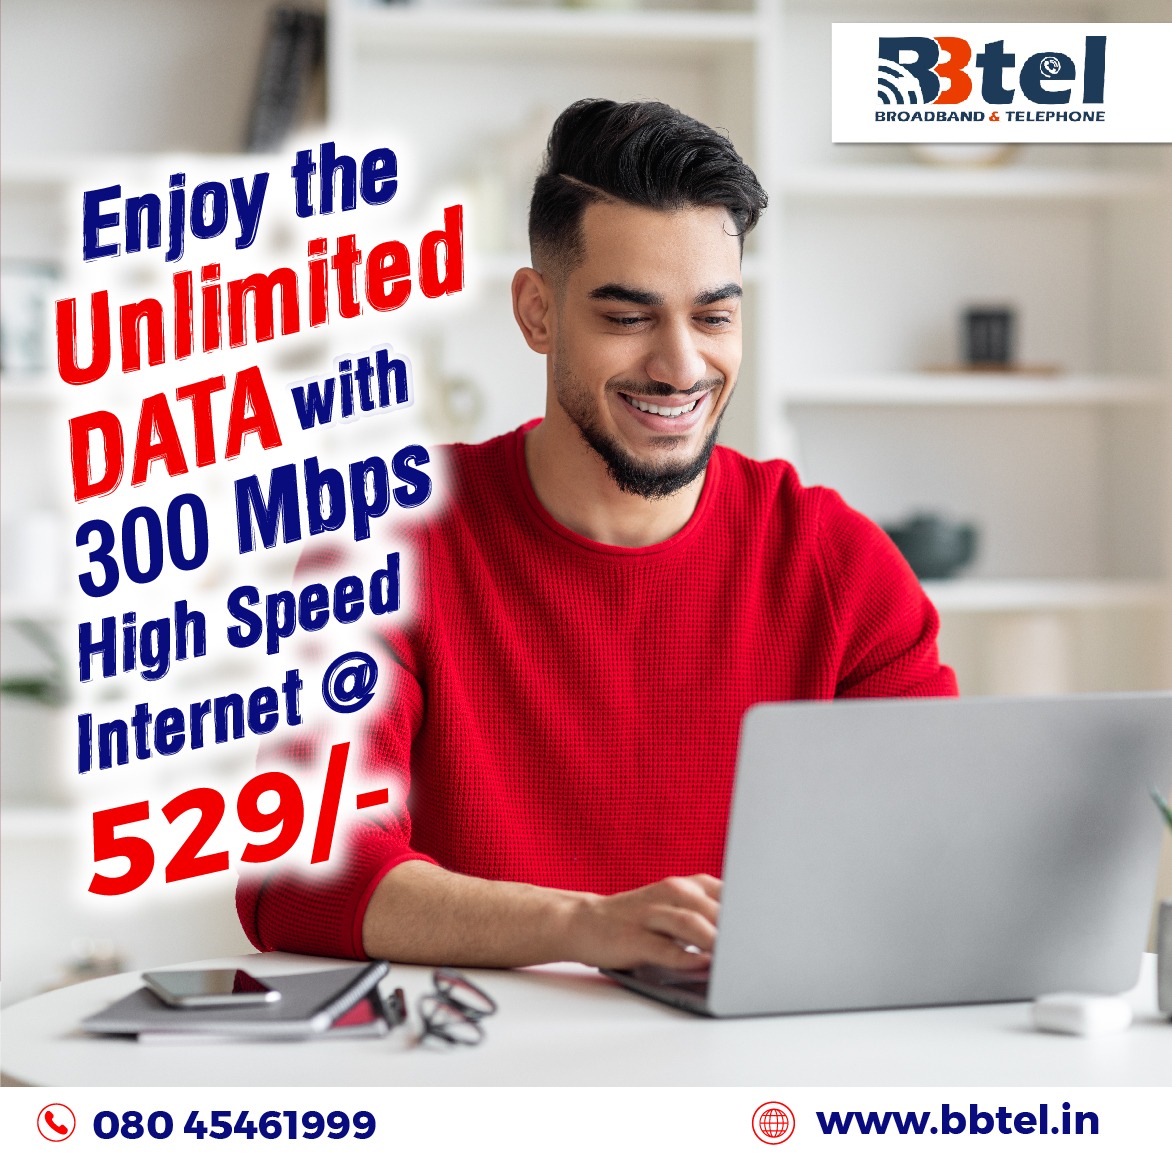 Enjoy the Unlimited Data with 300Mbps High speed Internet @ 529/-*.......
.
.
#broadband #WIFI #internetserviceprovider #HighSpeedInternet #fiber  #fastinternet  #InternetConnection #speed #serviceprovider #BroadbandForAll #bangaloreinternet #HighSpeedInternet #internetandservice